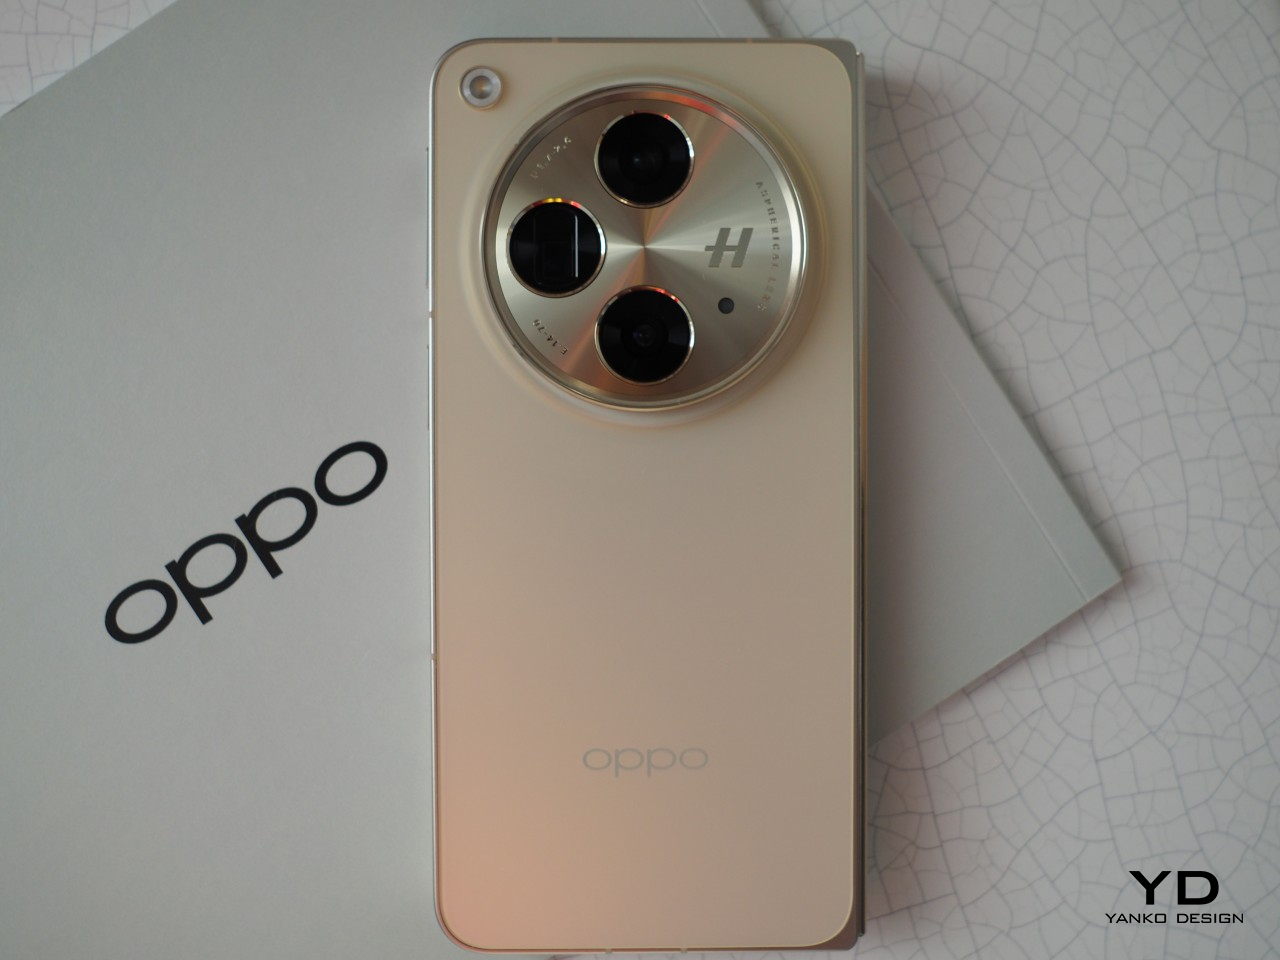 Oppo Find N3 Flip review: Premium foldable phone with feature-rich camera